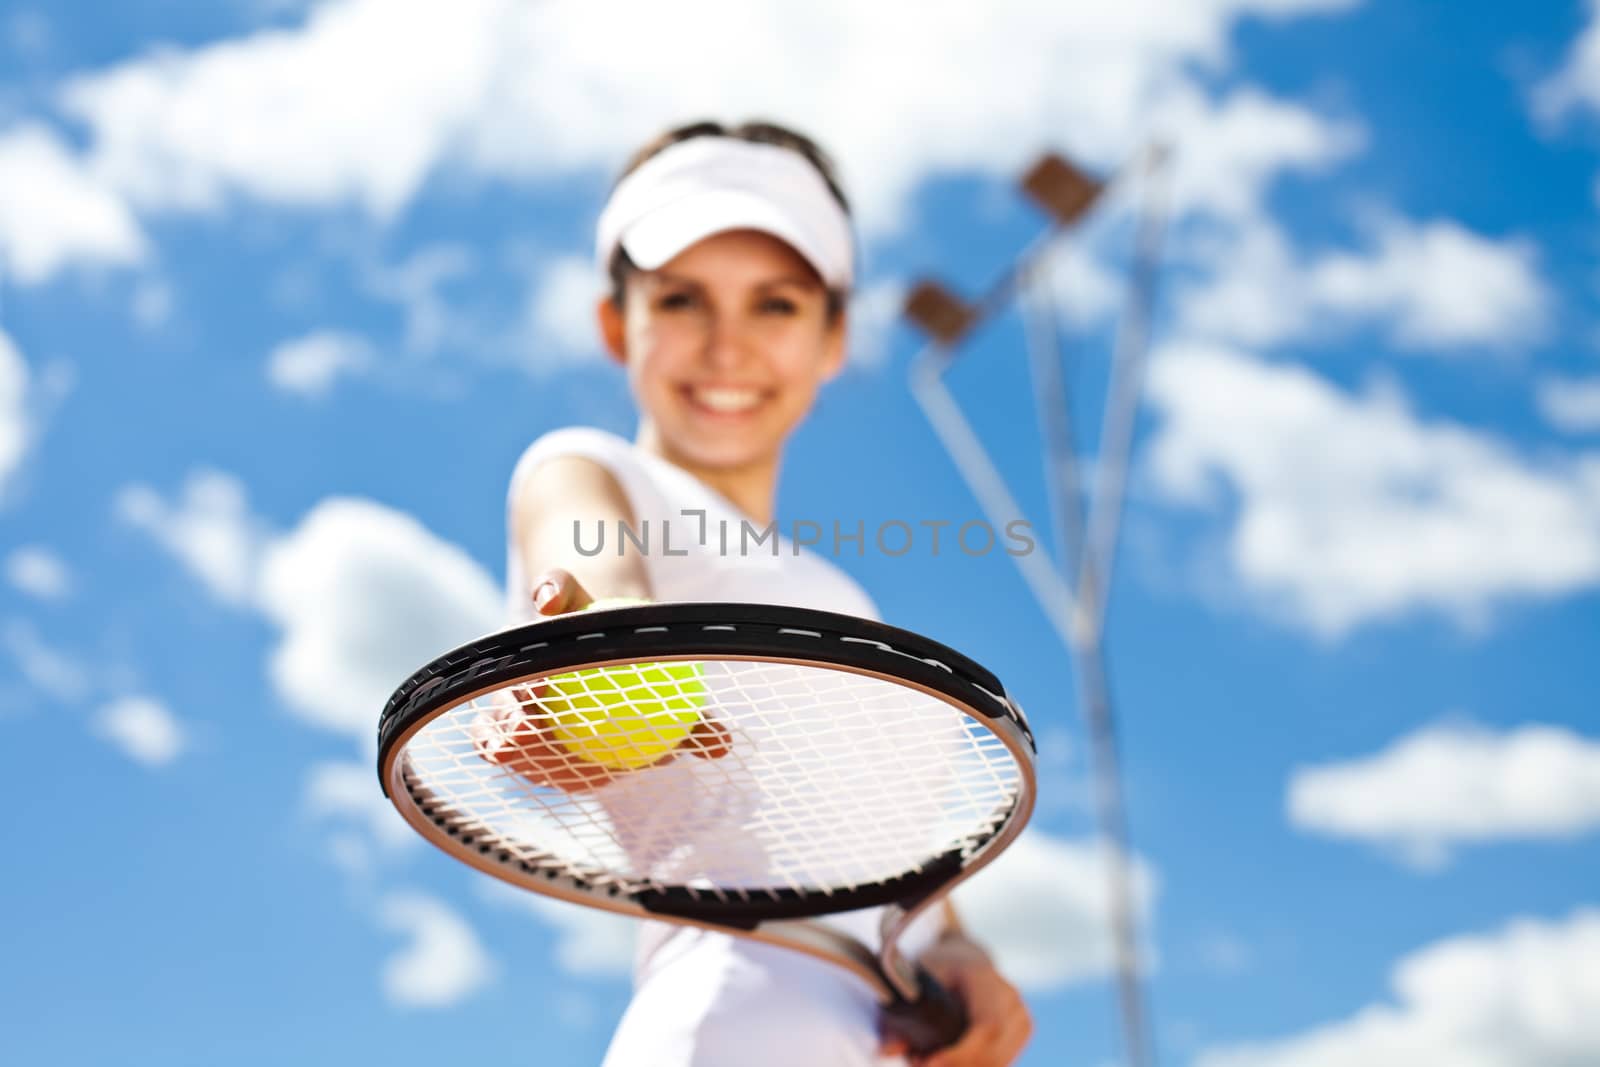 Playing tennis, summertime saturated theme by JanPietruszka